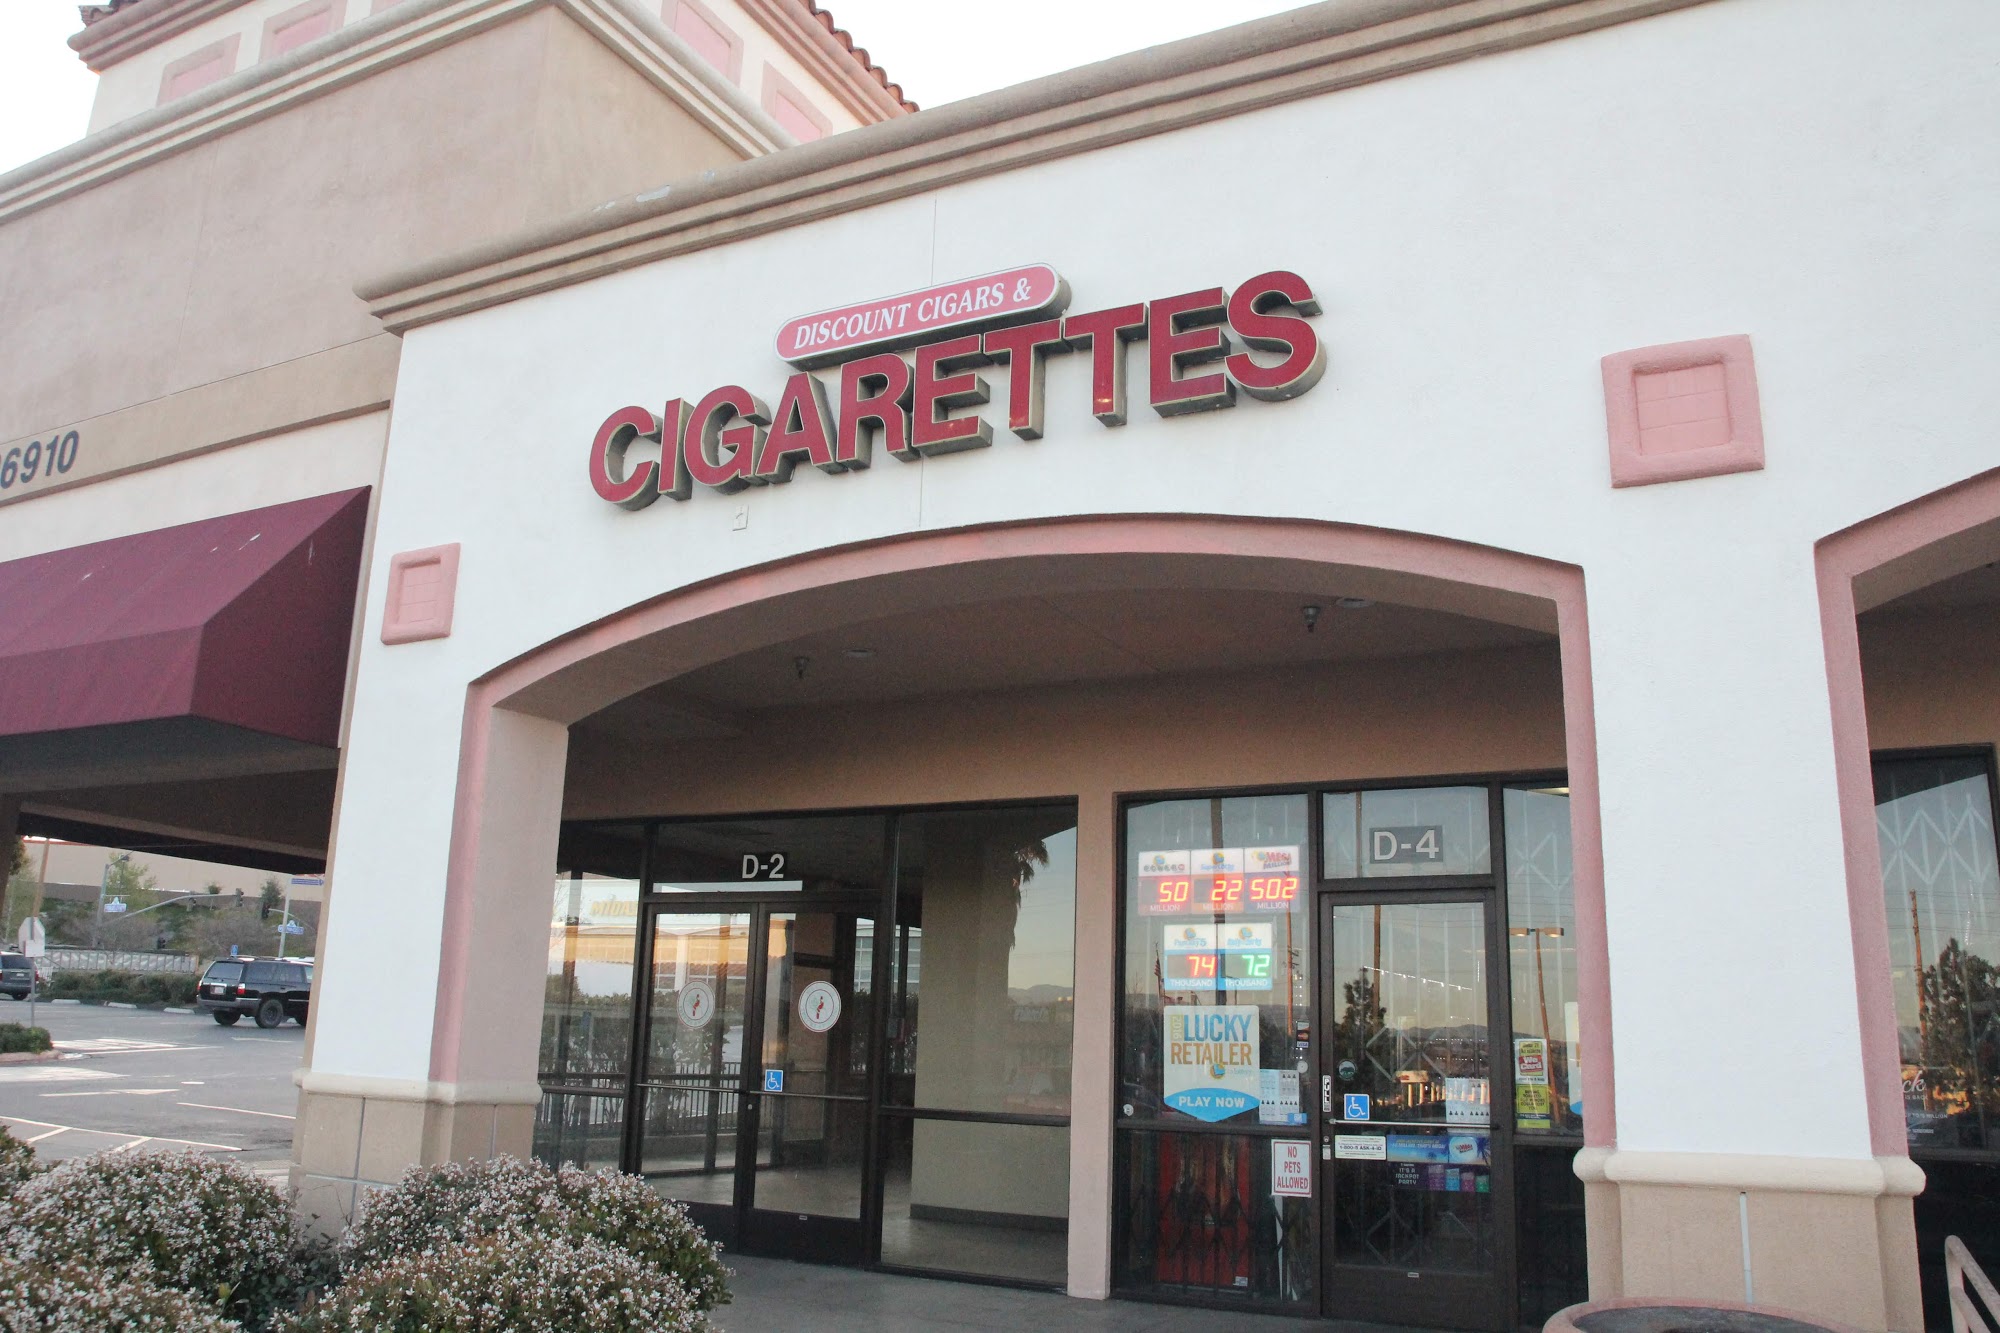 Discount Cigars and Cigarettes